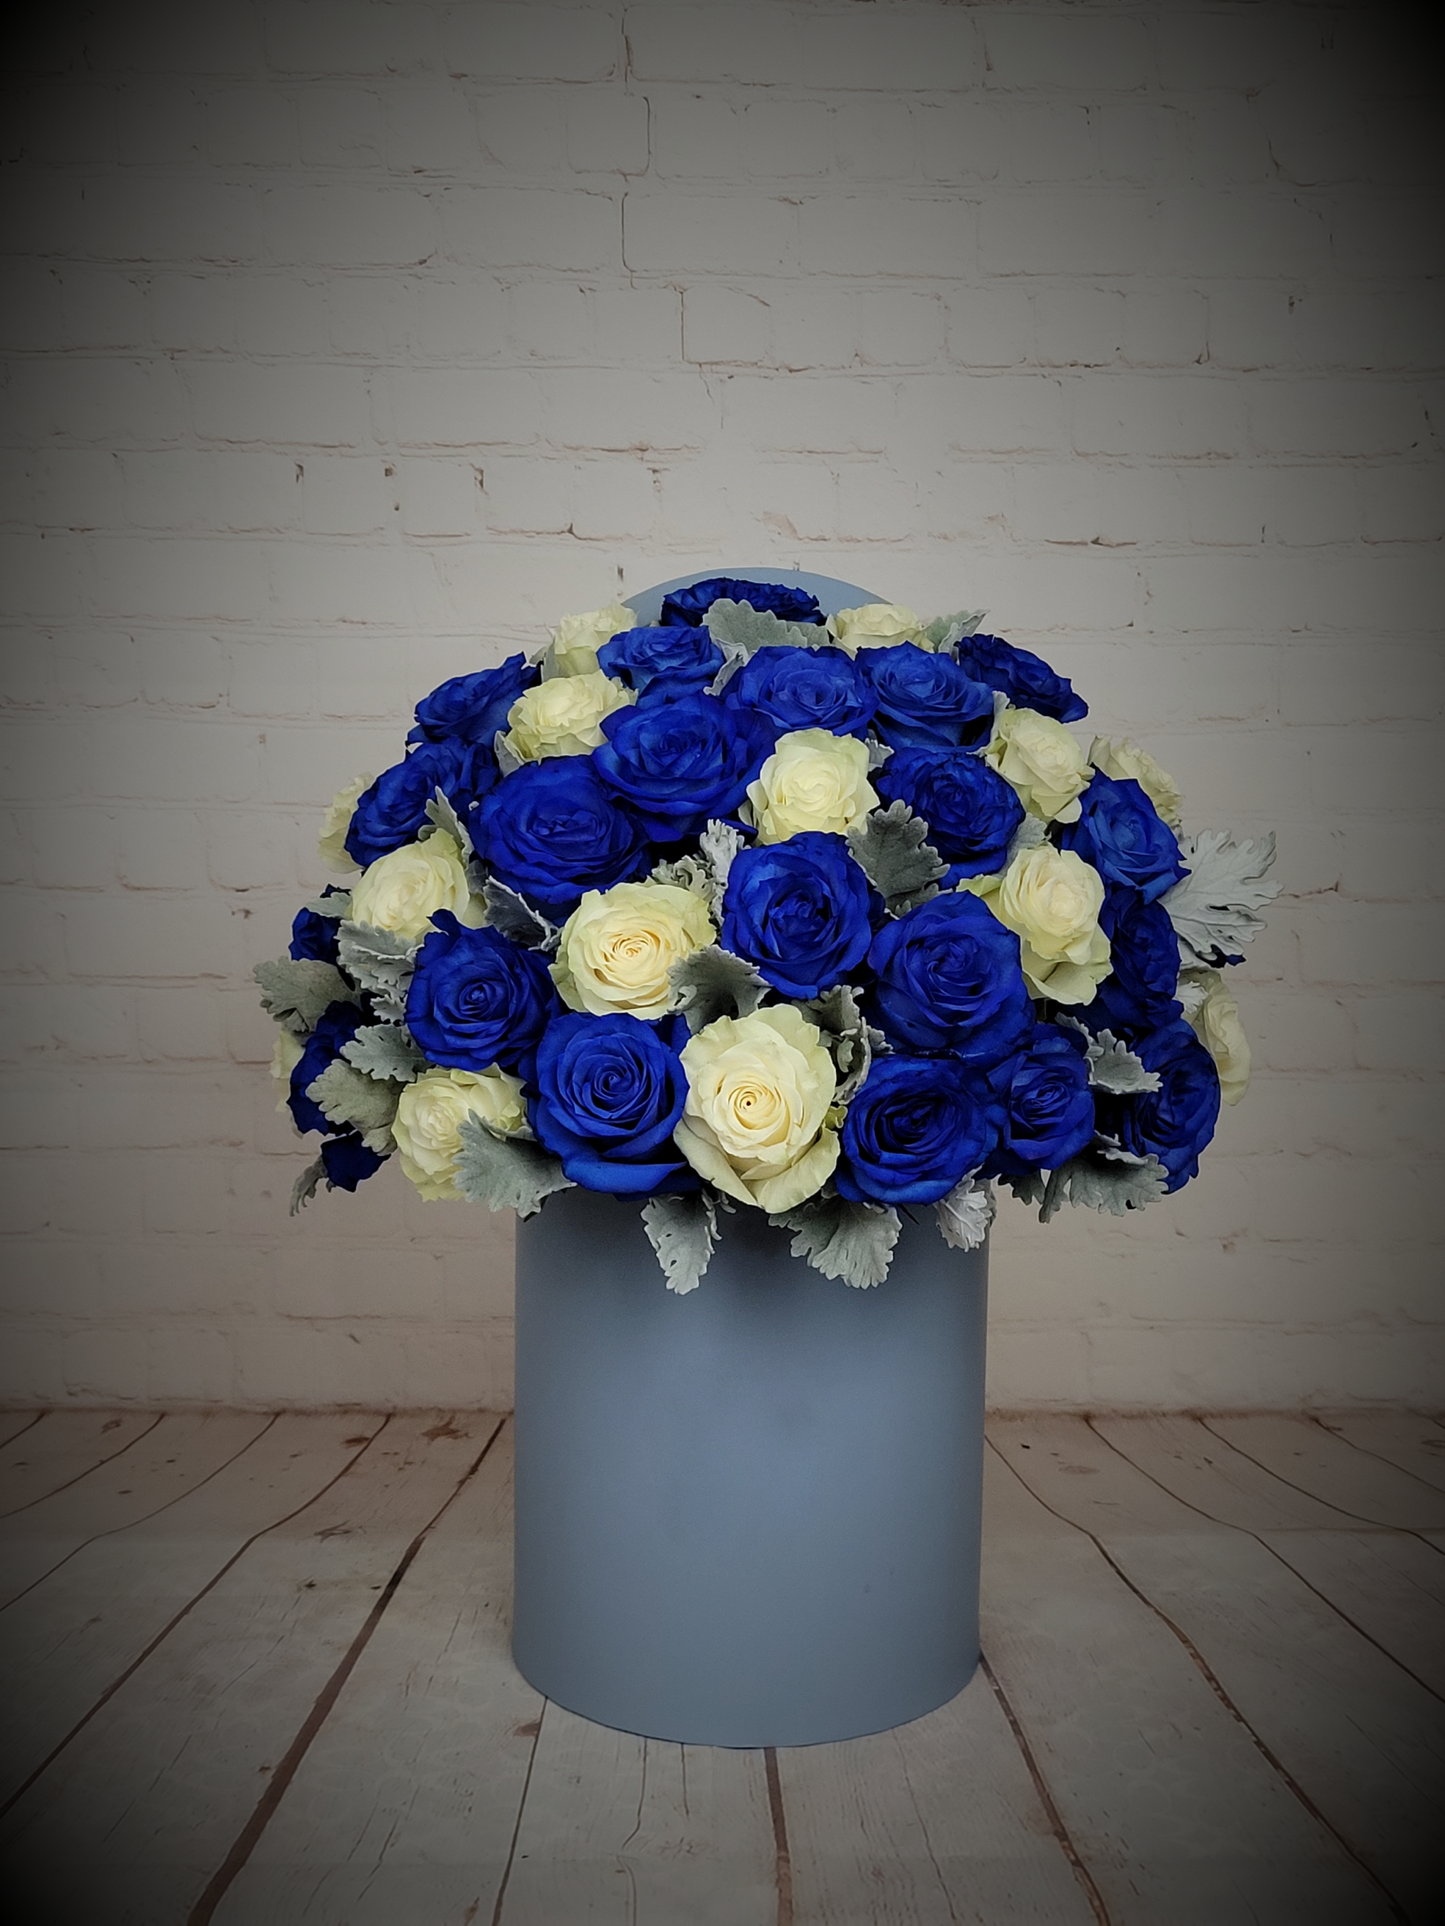 Blue and white roses in a blue box